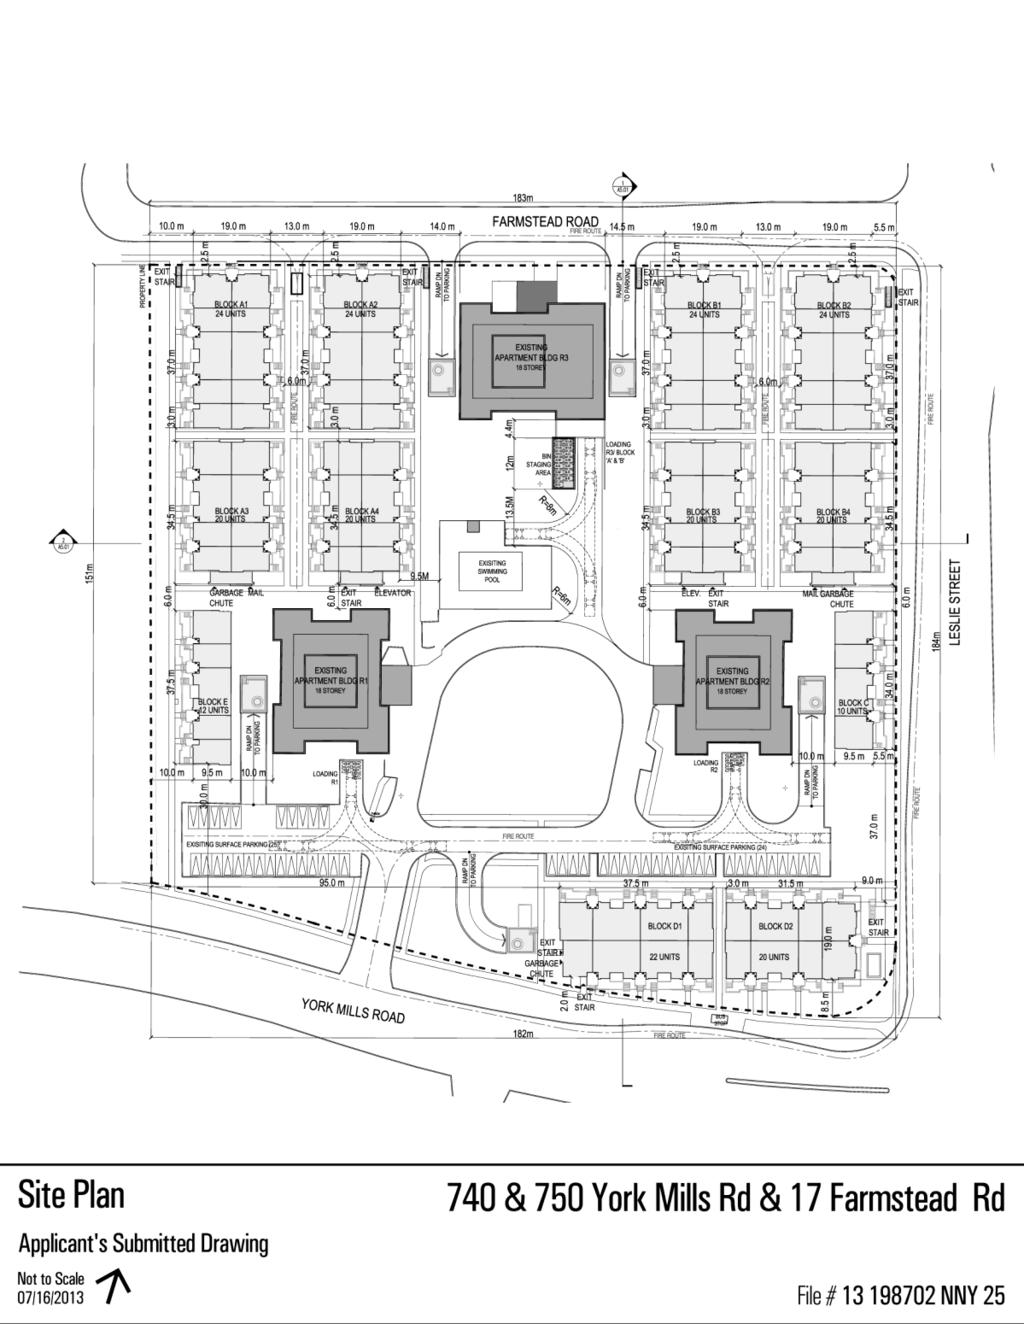 Attachment 1: Site Plan Staff report for action